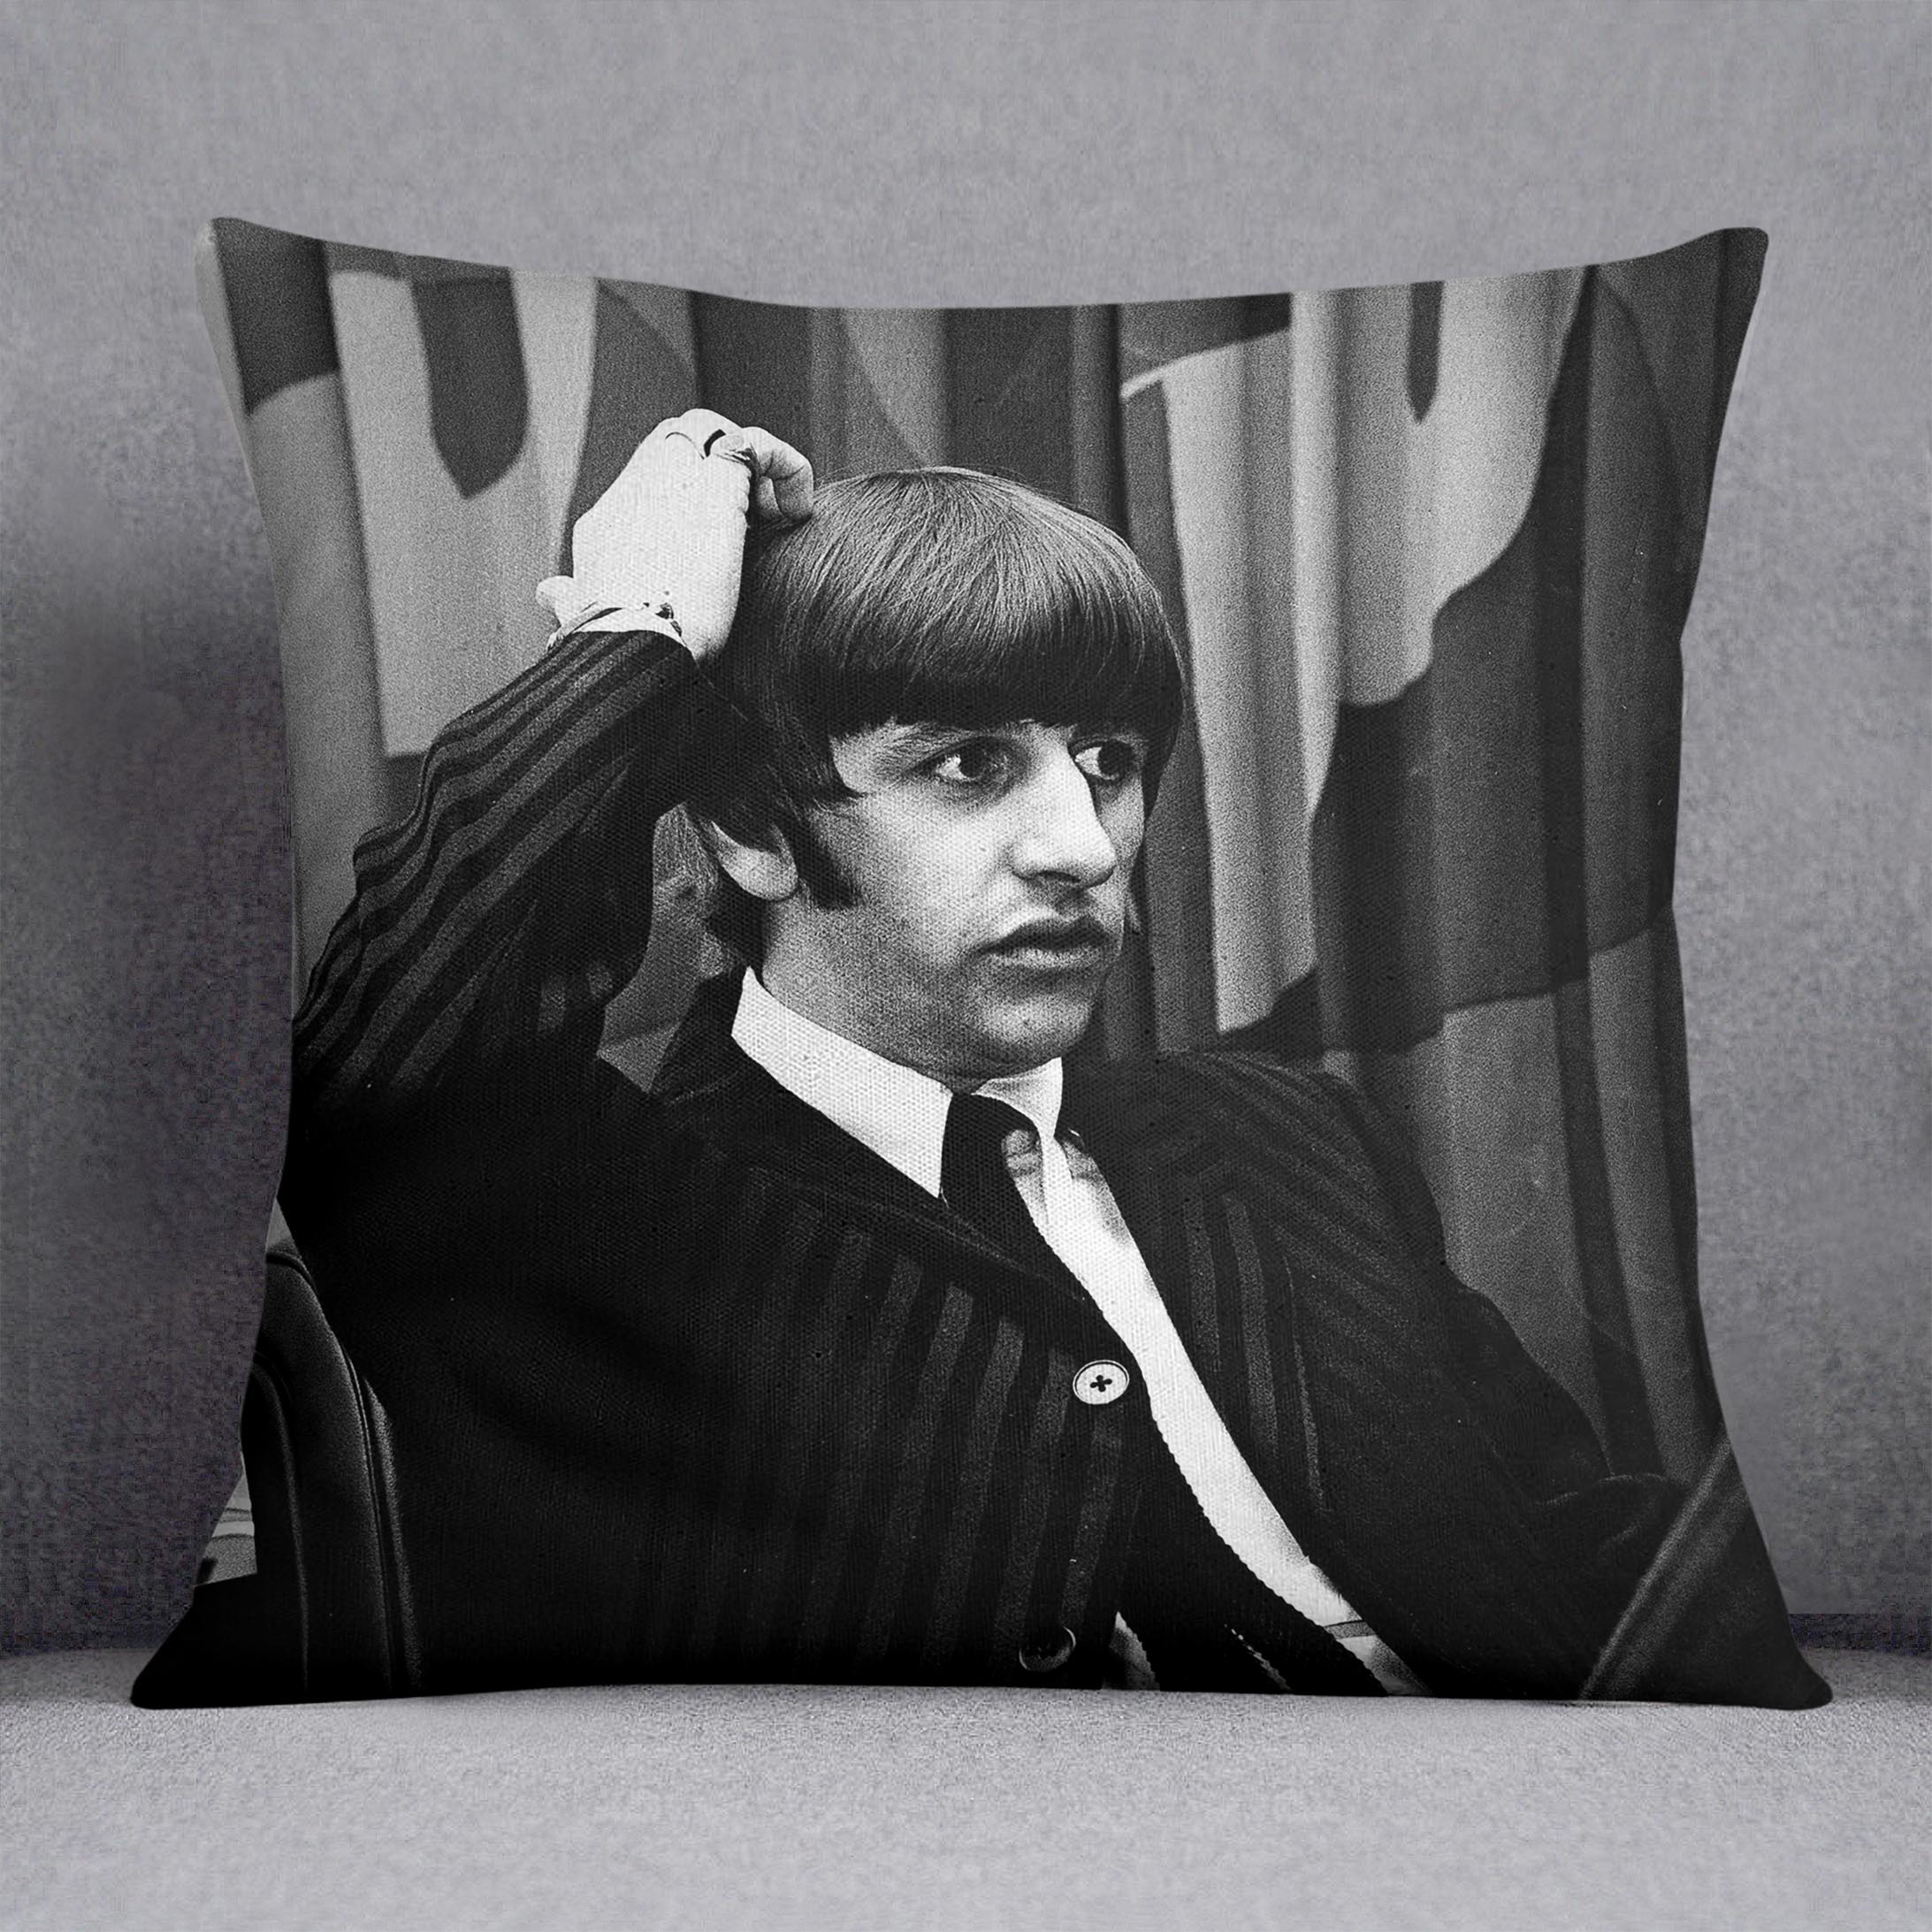 Ringo Starr at a press conference Cushion